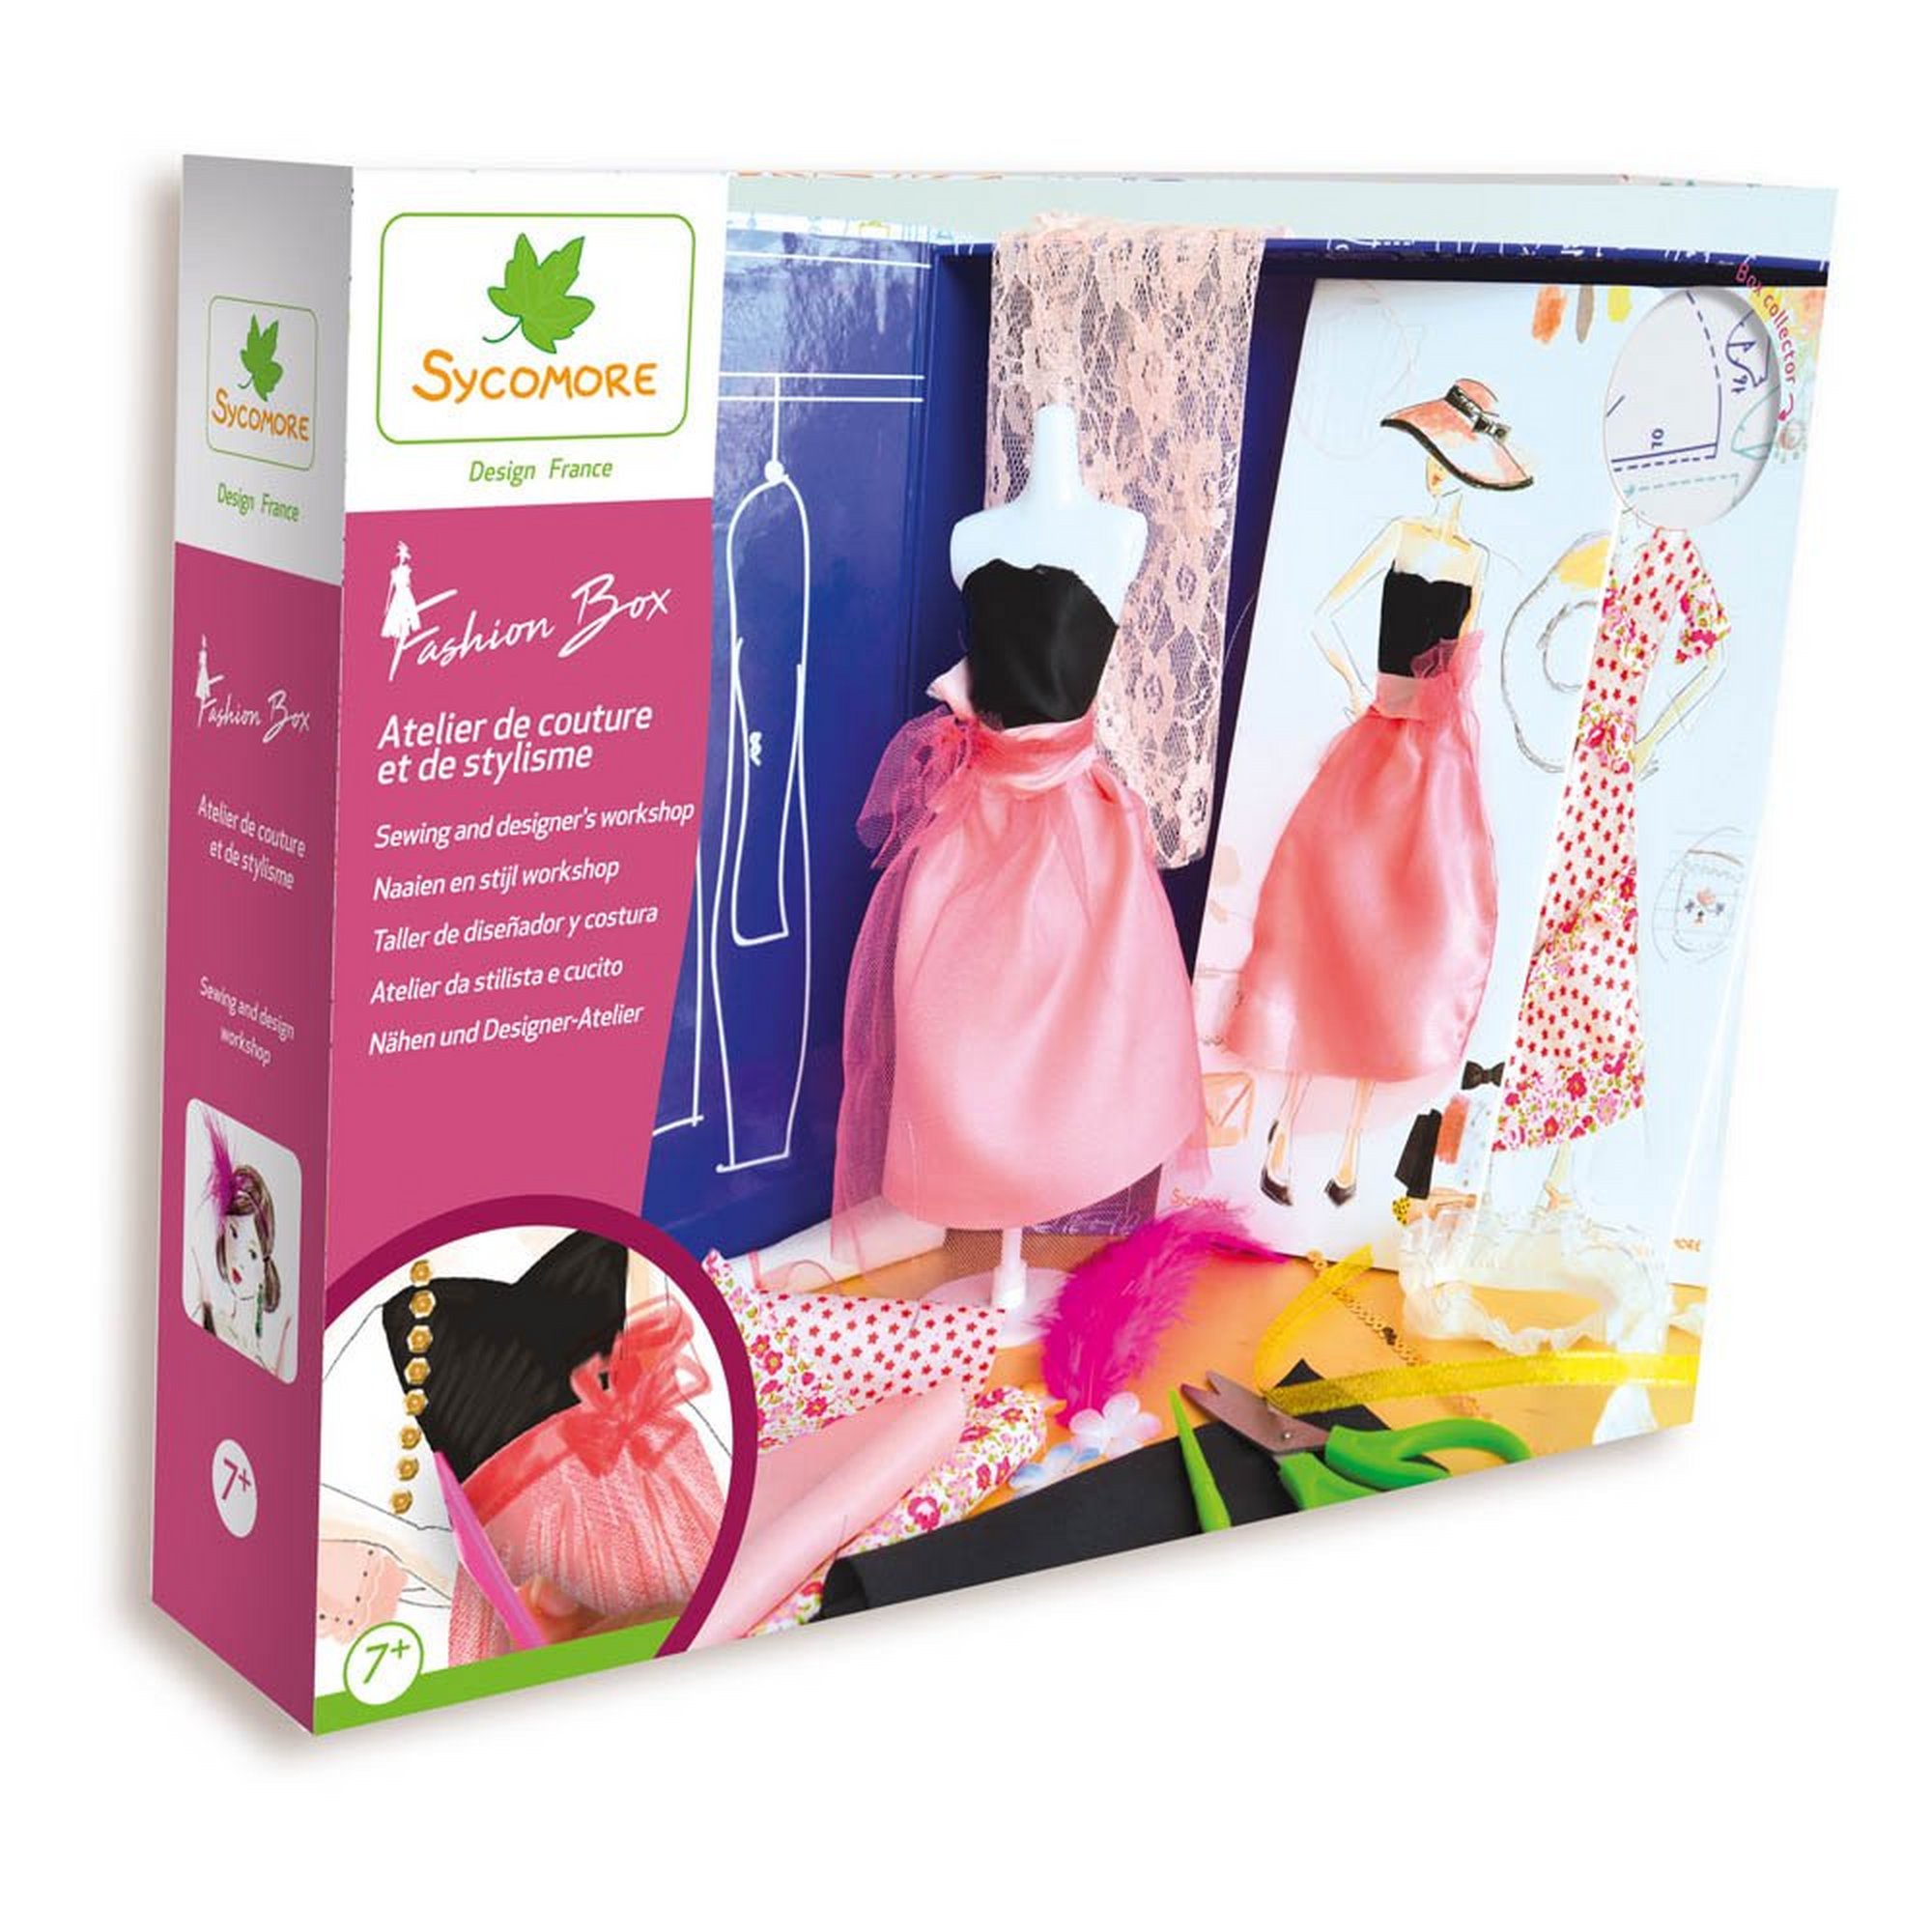 Sycomore Sewing and Design Workshop Fashion Box